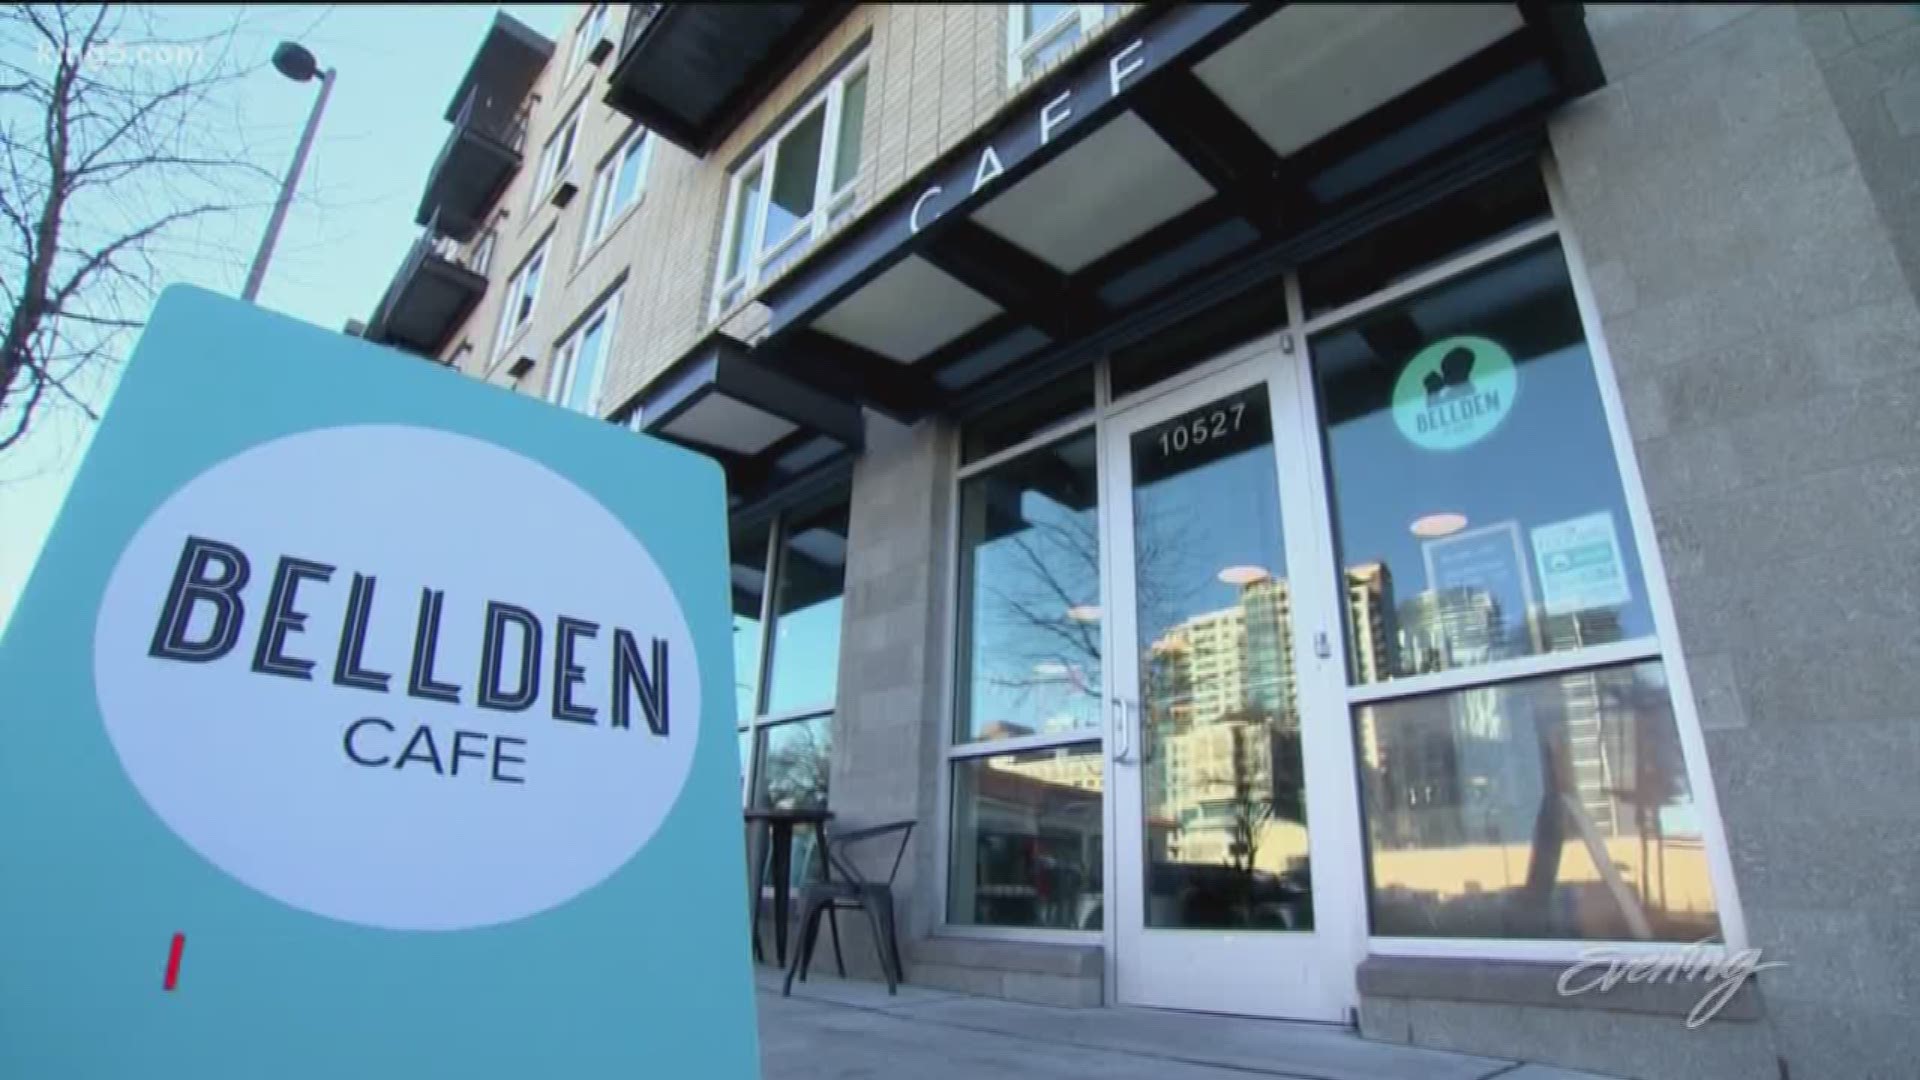 Bellden Cafe donates 25% of specialty drink proceeds to charity